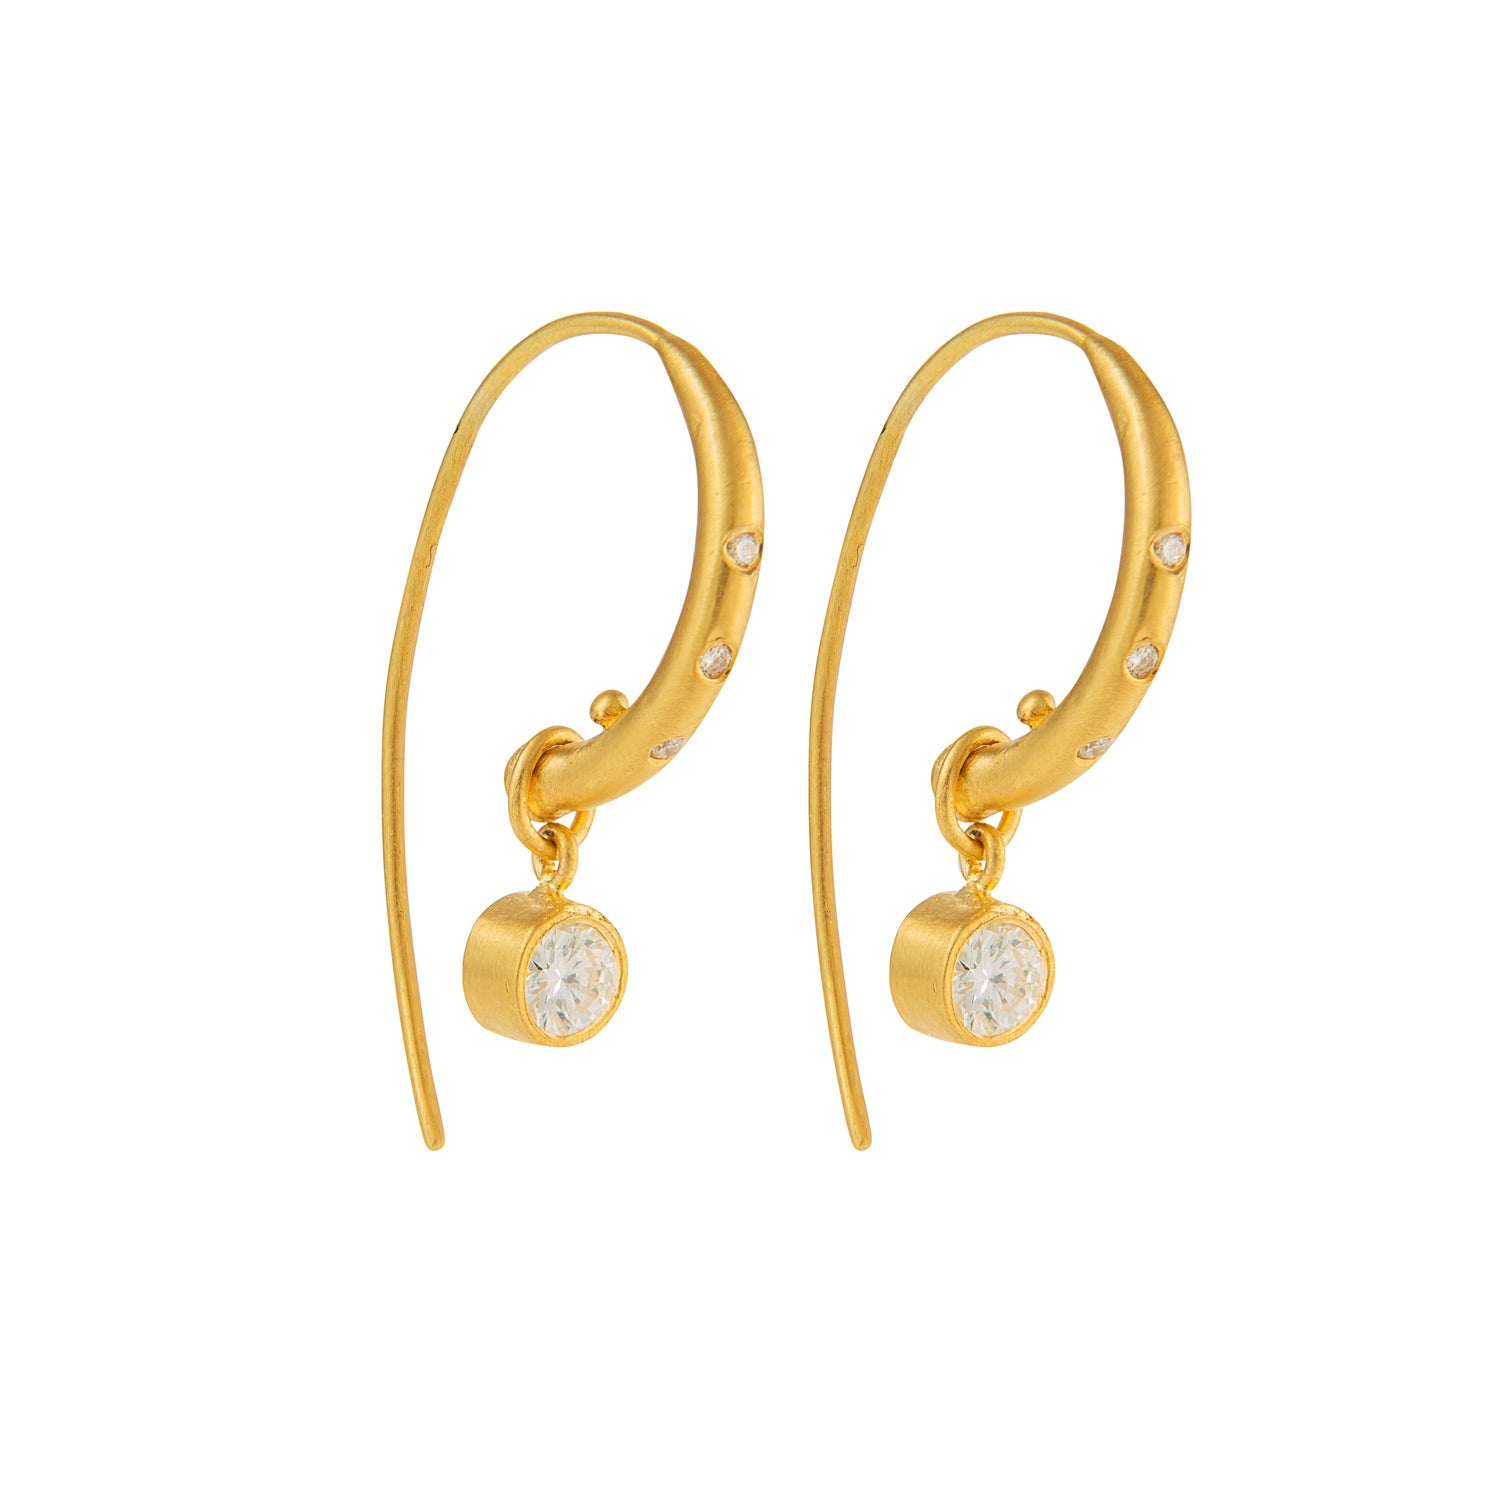 Shop Rubans Voguish 24K Gold Plated Contemporary Hoop Earrings Online at  Rubans